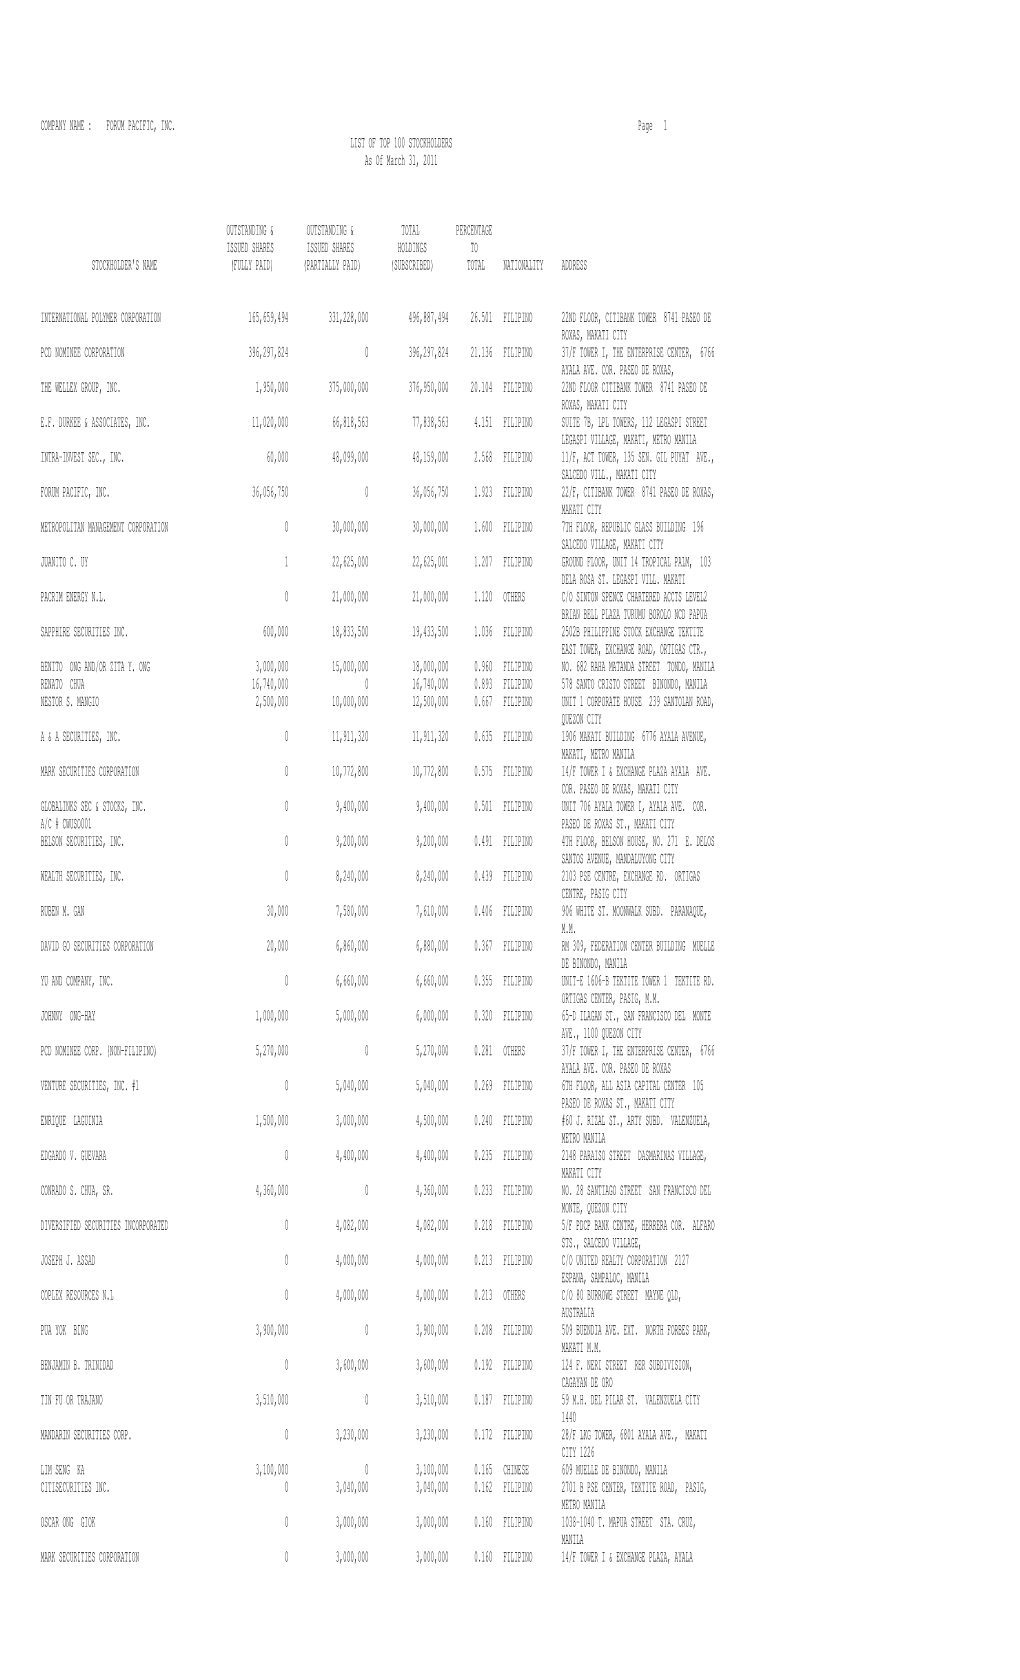 TOP 100 STOCKHOLDERS As of March 31, 2011